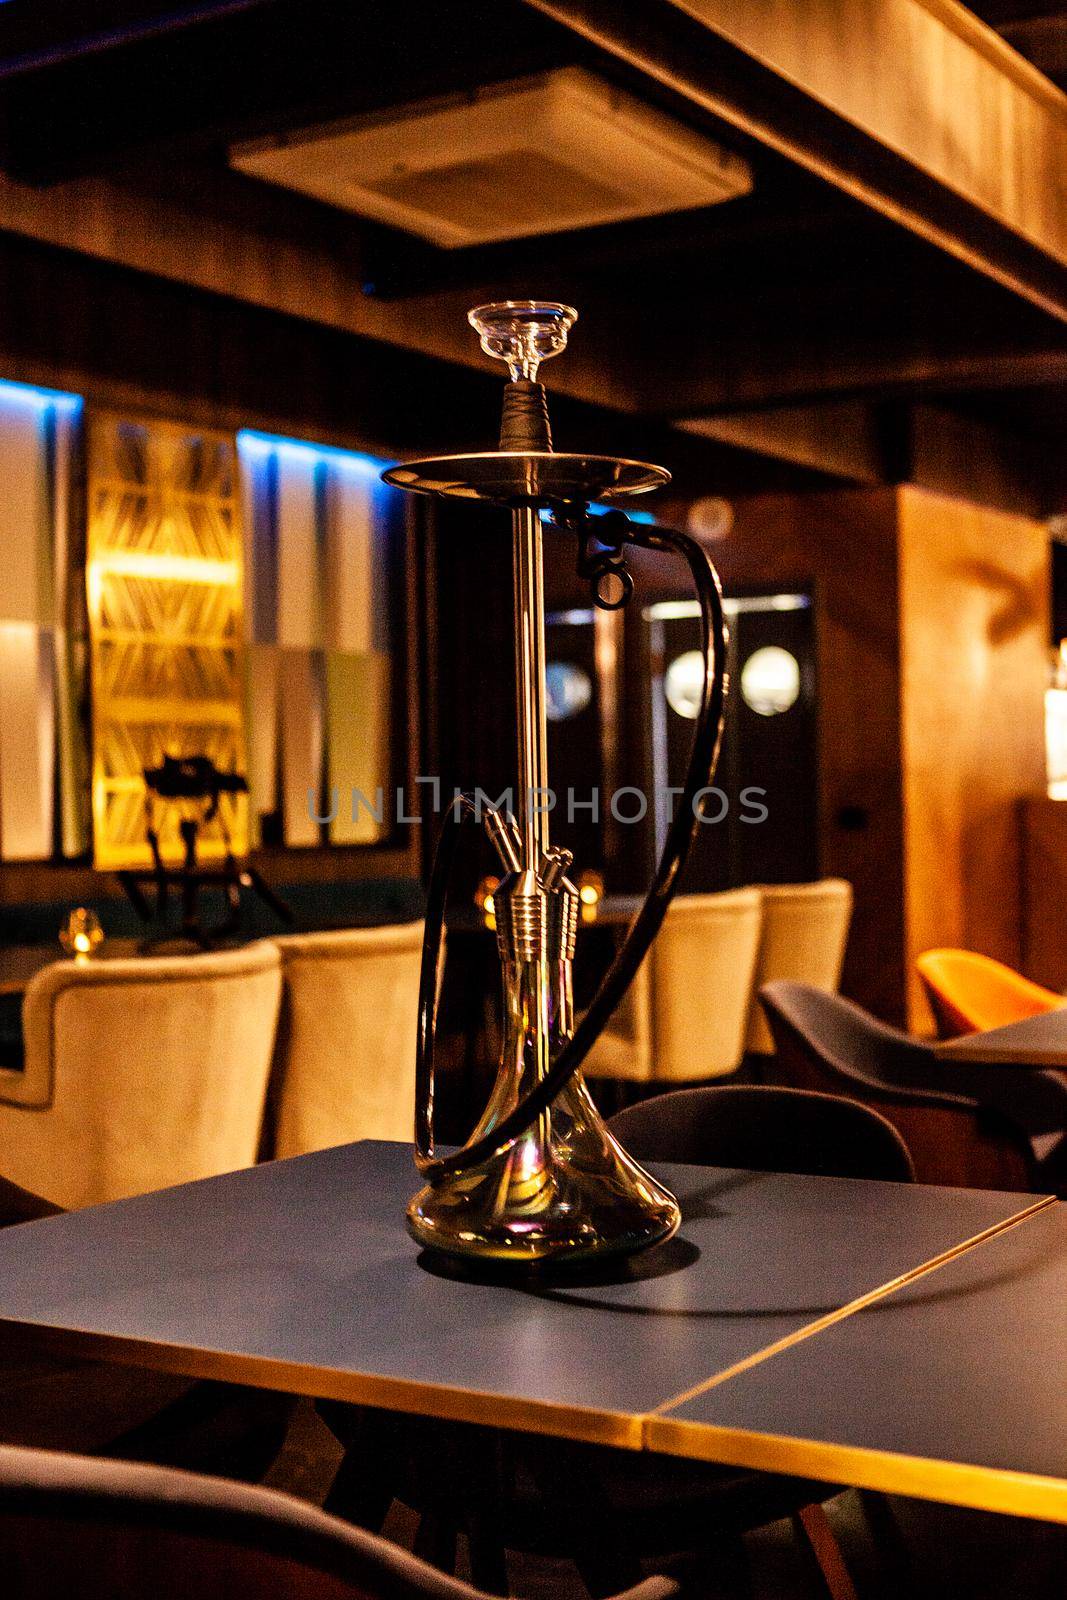 hookah in lounge bar on the table. Relaxation habit